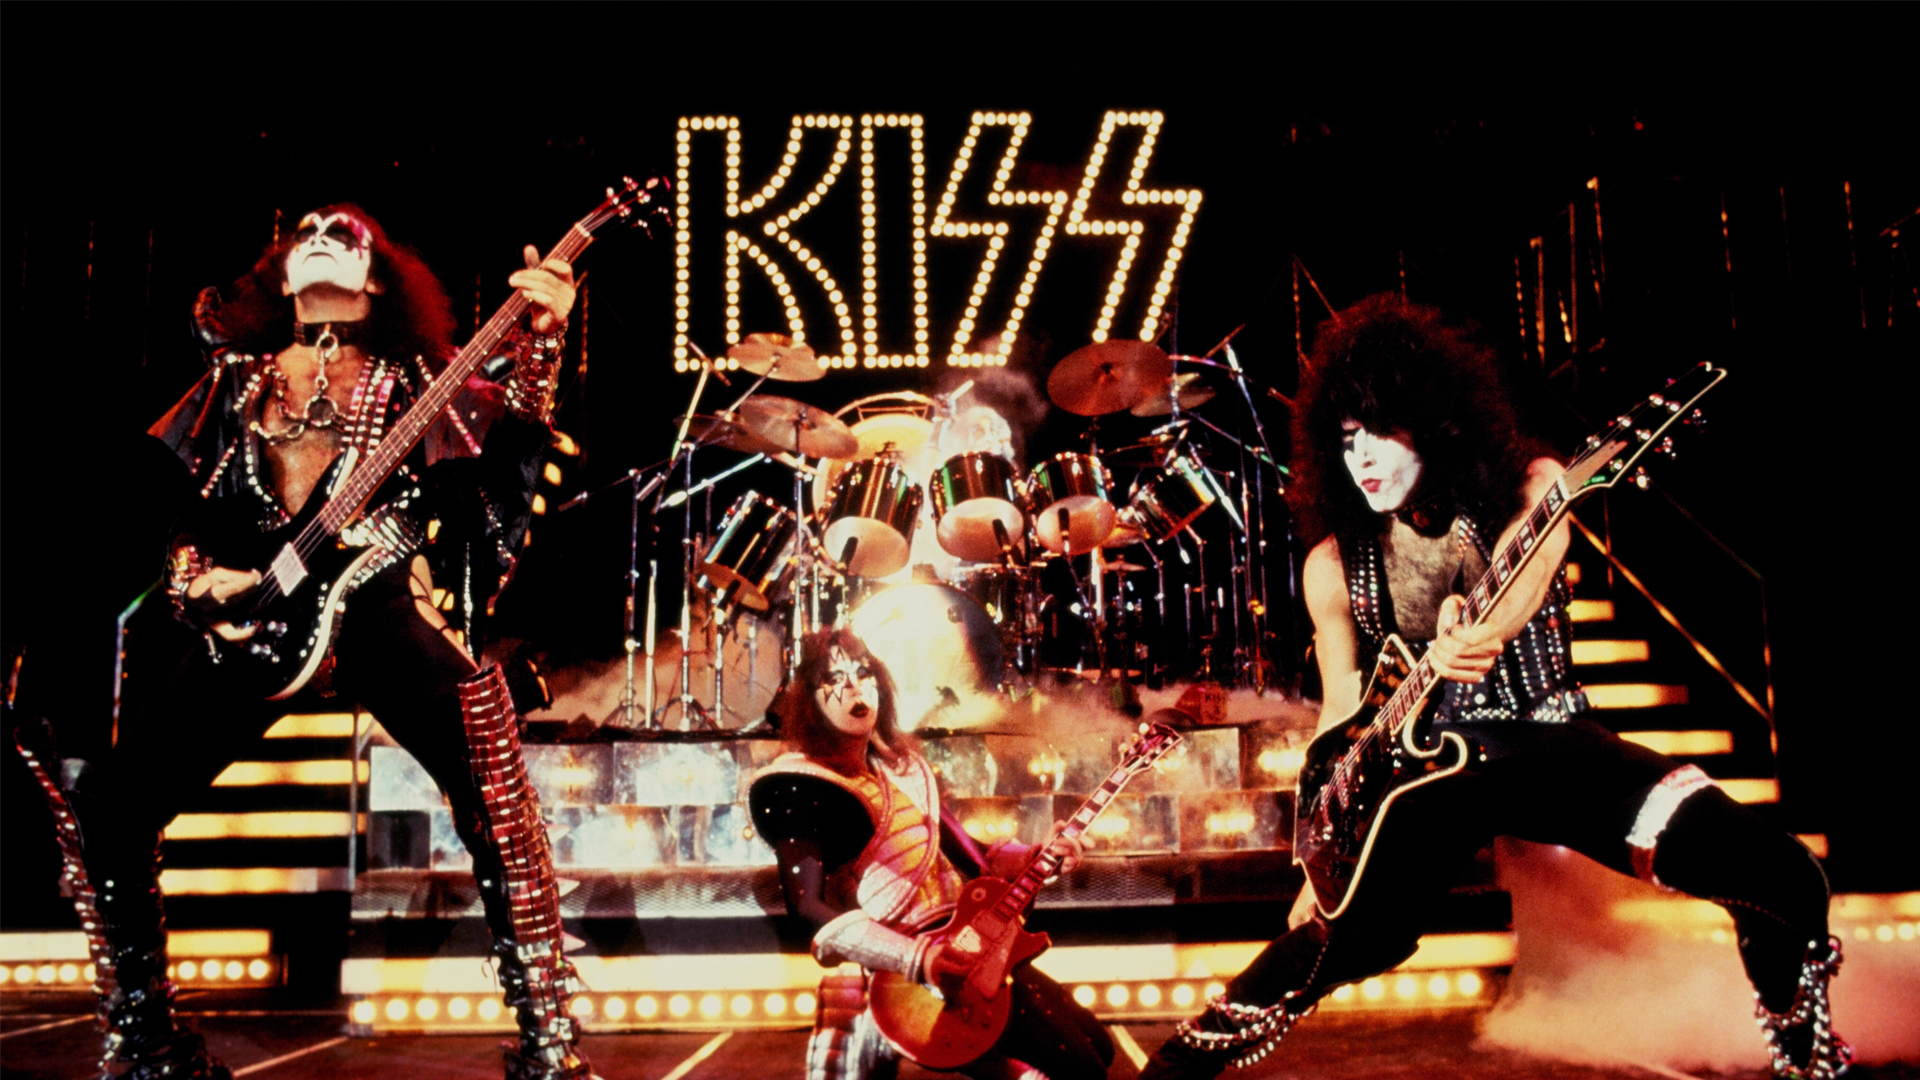 100+] Kiss Band Pictures | Wallpapers.com